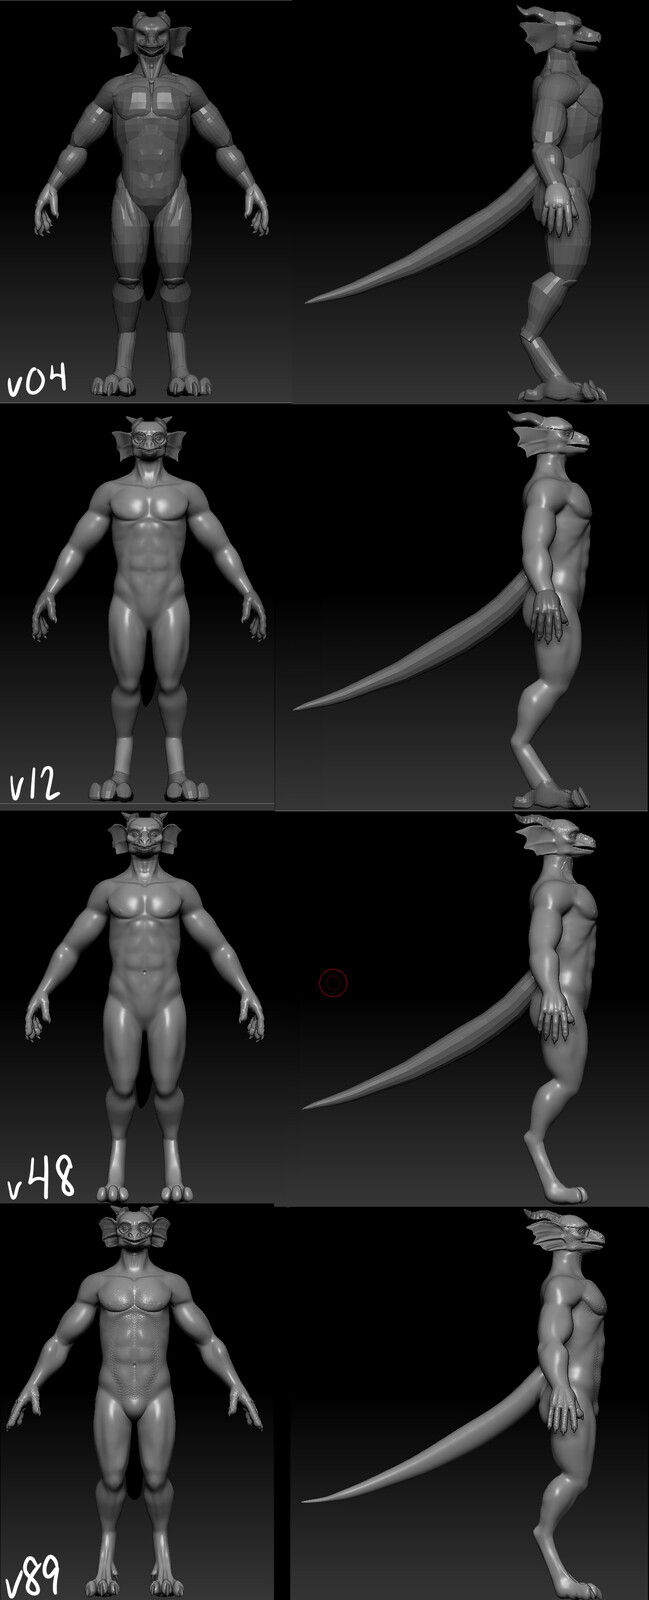 Once the blockout was in Zbrush, I slowly refined the body and sculpted the details based on my references, dynameshing as I went.  I tweaked the proportions slightly and diverged from the original drawing to make the feet make more sense in 3D.